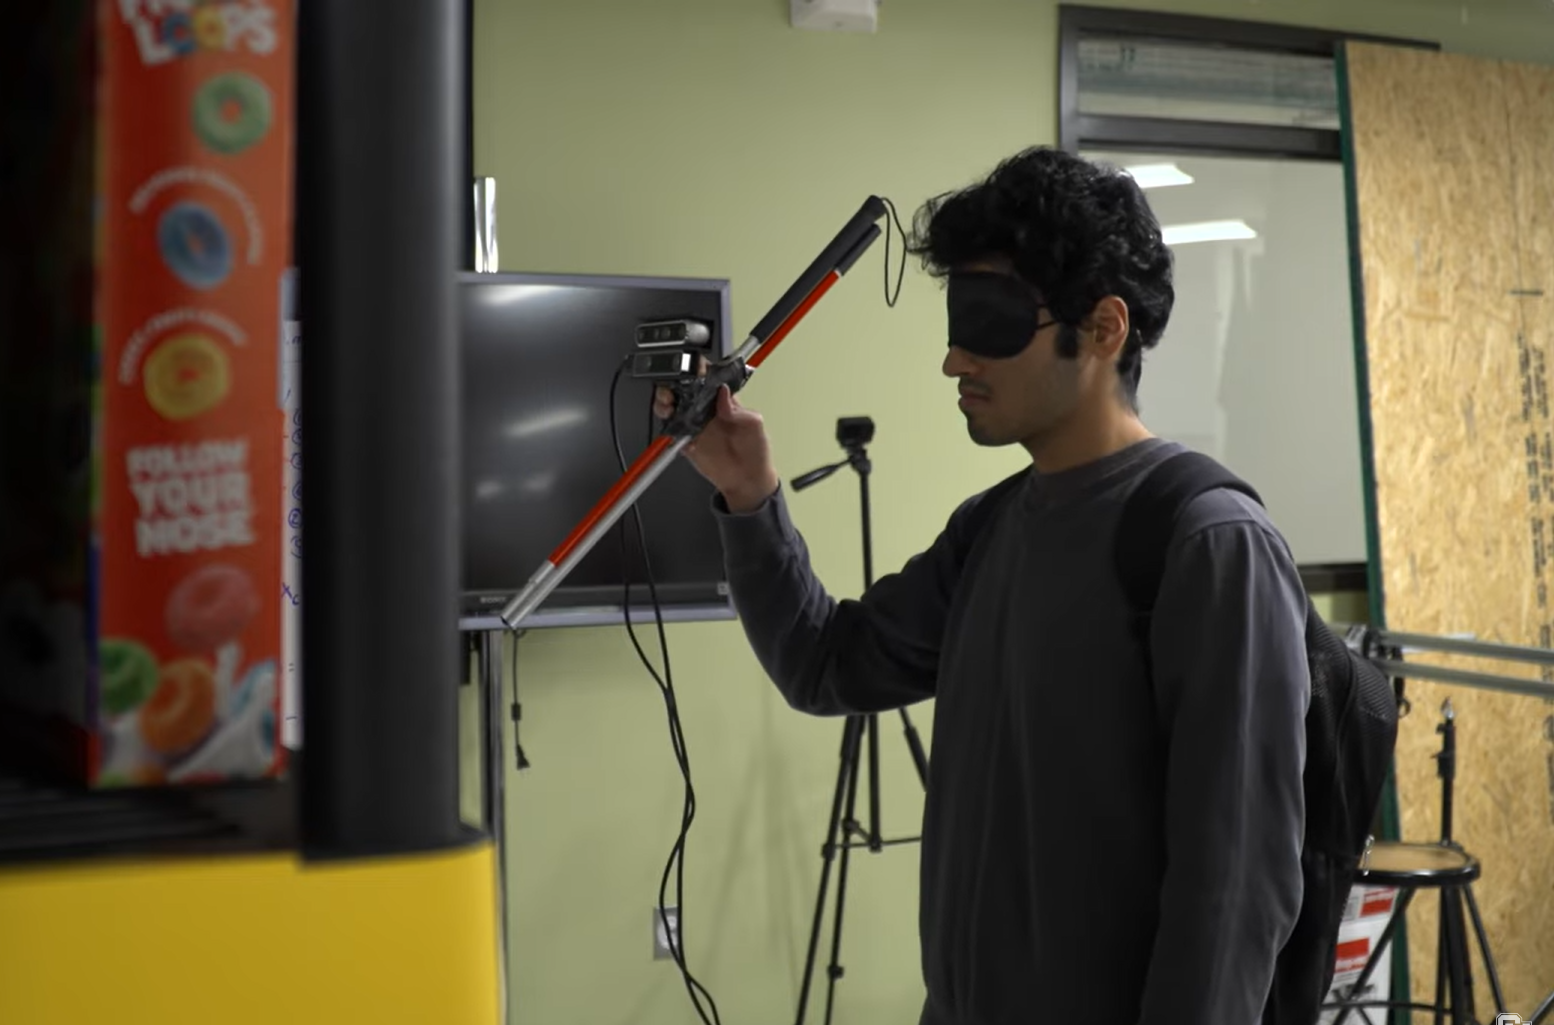 Researchers Develop 'Smart' Walking Stick for Visually Impaired